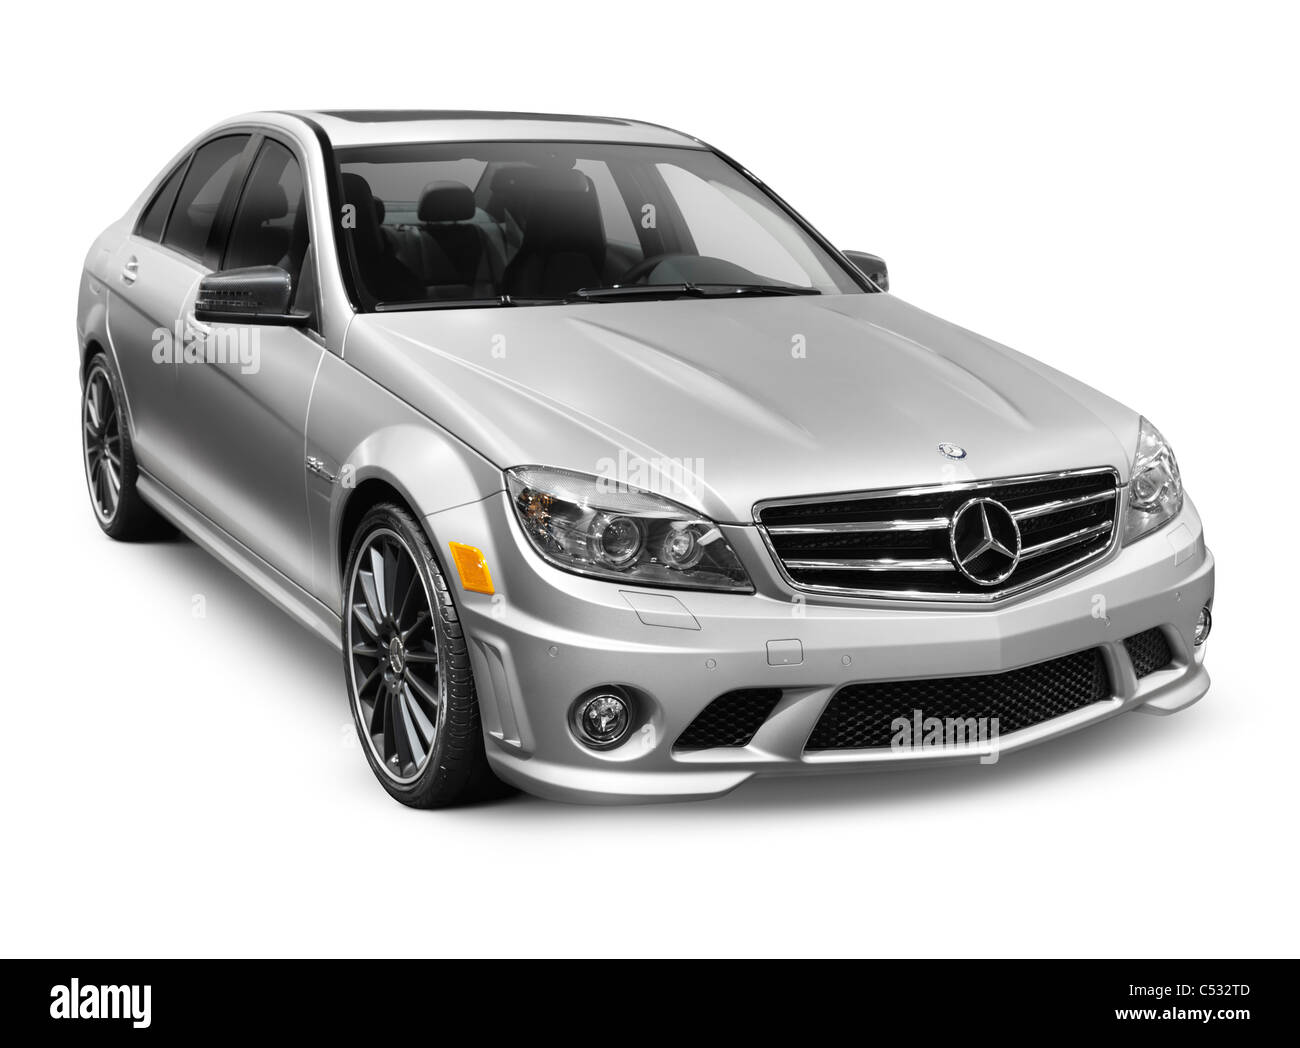 License available at MaximImages.com - 2011 silver Mercedes-Benz C63 AMG C-class sedan Affalterbach edition. Isolated car on white background with cli Stock Photo